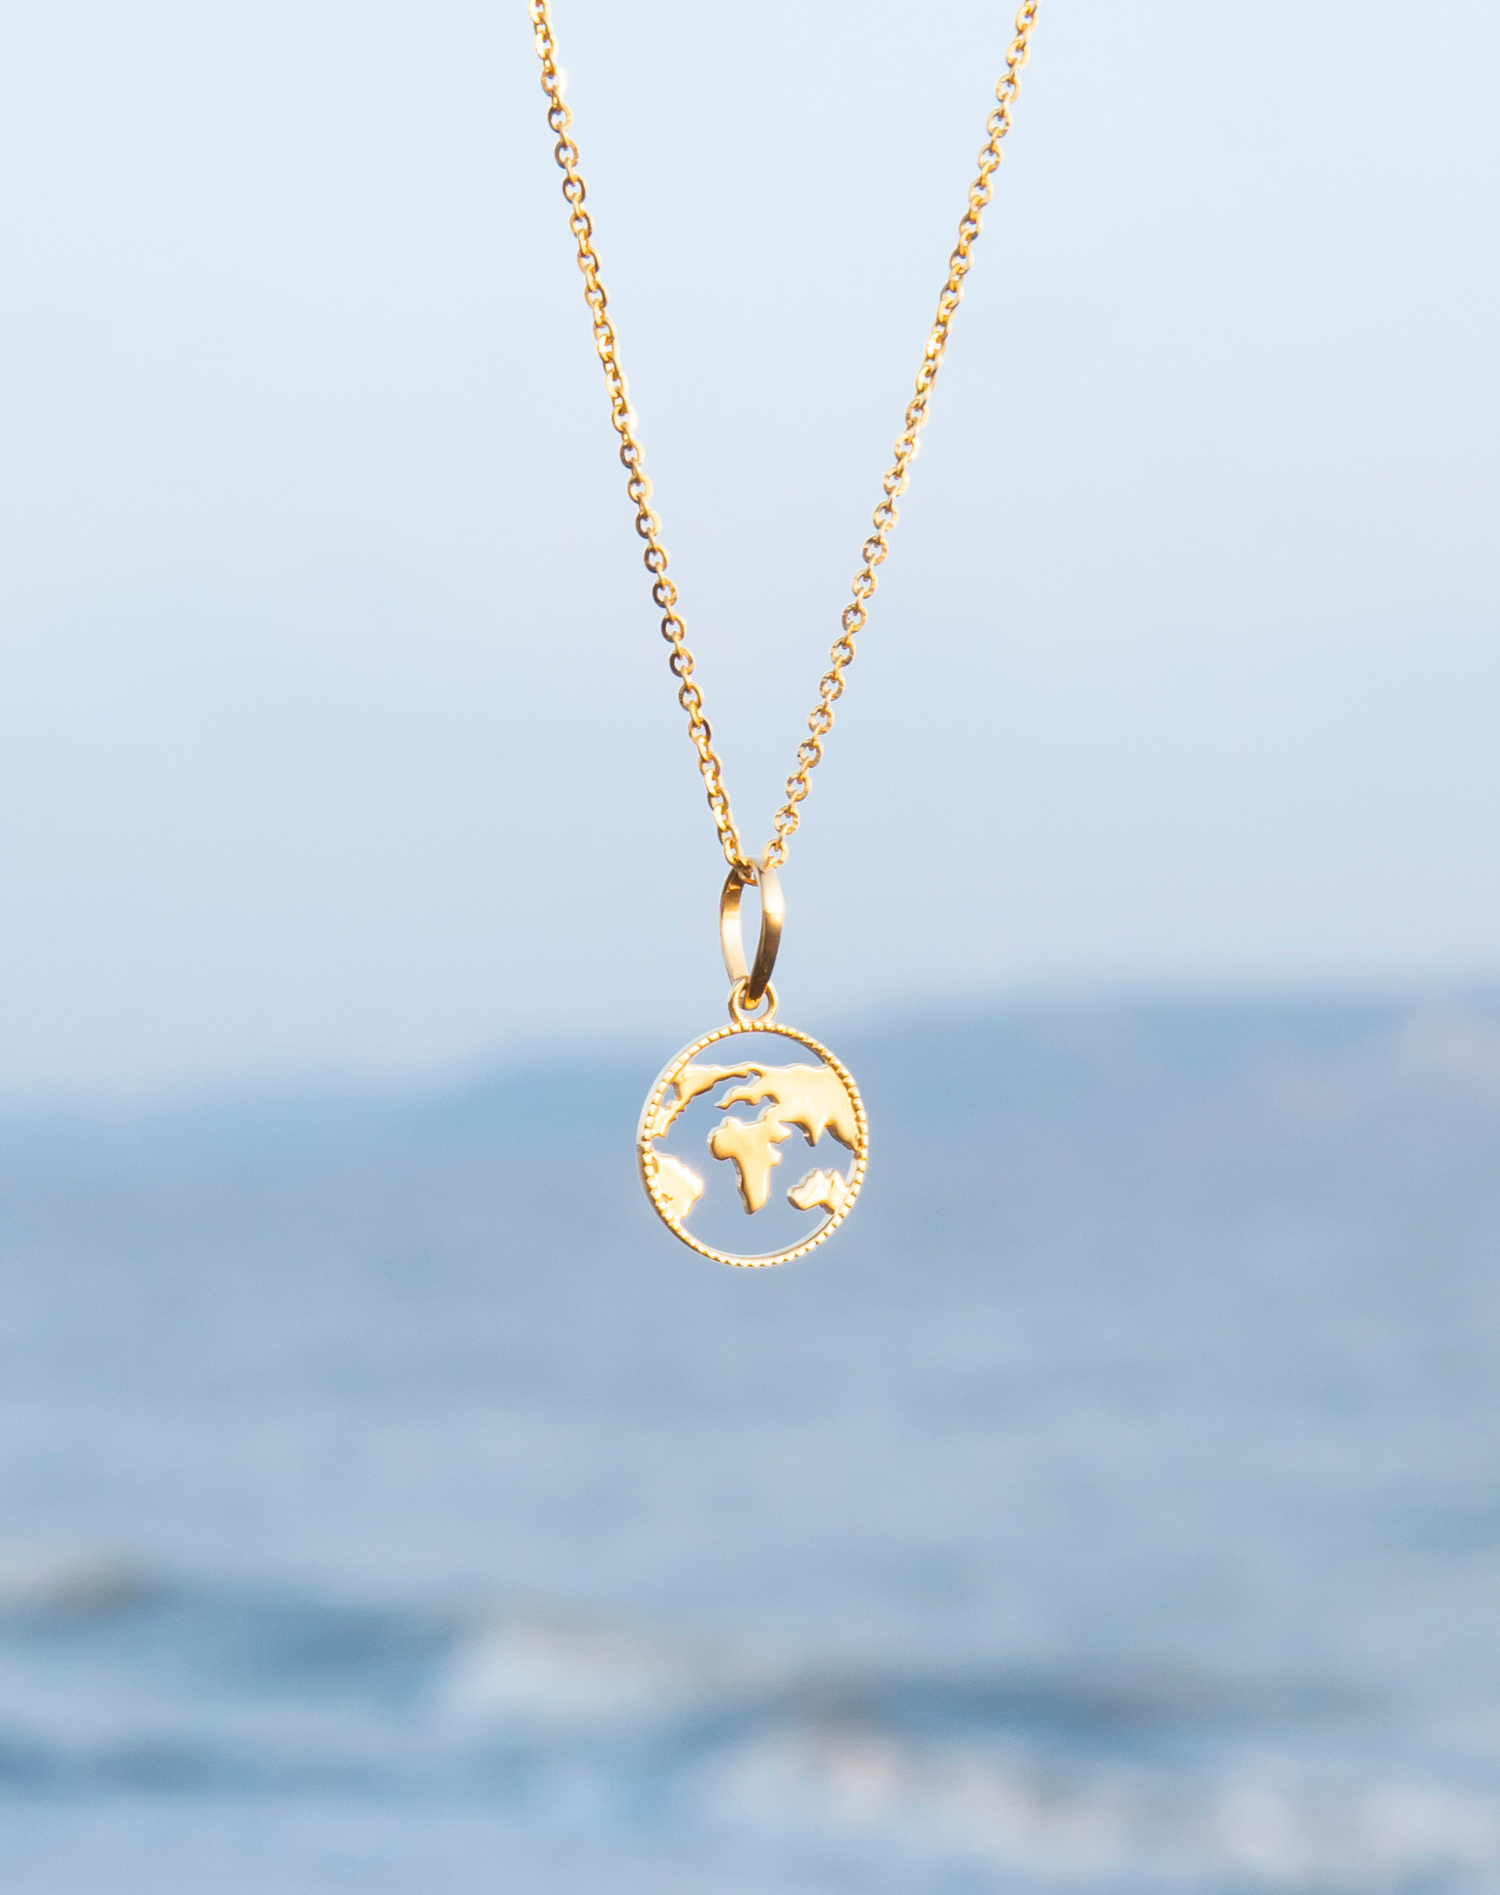 10KGold World Pendant Gold | 5.5 Grams – FrostNYC